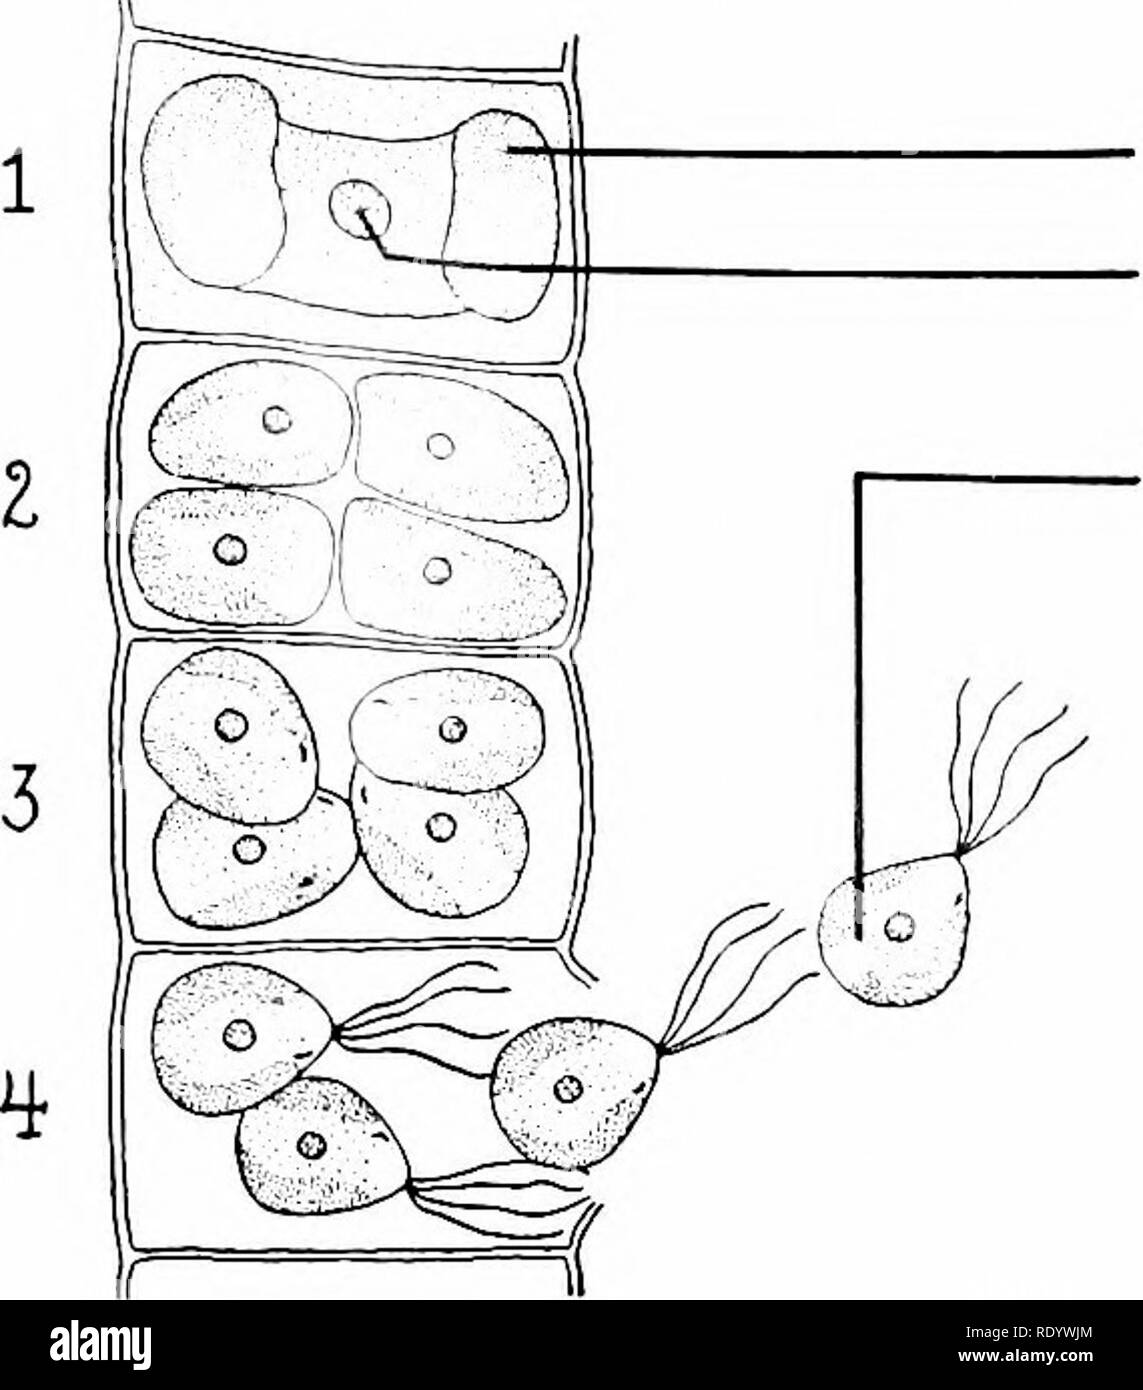 . Principles of modern biology. Biology. Cell Division in Relation to Reproduction - 57. CHLOROPLAST NUCLEUS ZOOSPORE Fig. 3-14. Speculation in Ulothrix, a filamentous green alga. 1, nonrepro- duing cell of filament; 2-4, formation and liberation of zoospores; 5-7, de- velopment of a zoospore into a new filament. suitable new medium, where it may begin to grow and bud again. Many species of algae reproduce asexually by means of free-swimming flagellated spores, called swarm spores, or zoospores. At least four, but frequently many, zoospores are formed from a single mother cell, as in Ulo- thri Stock Photo